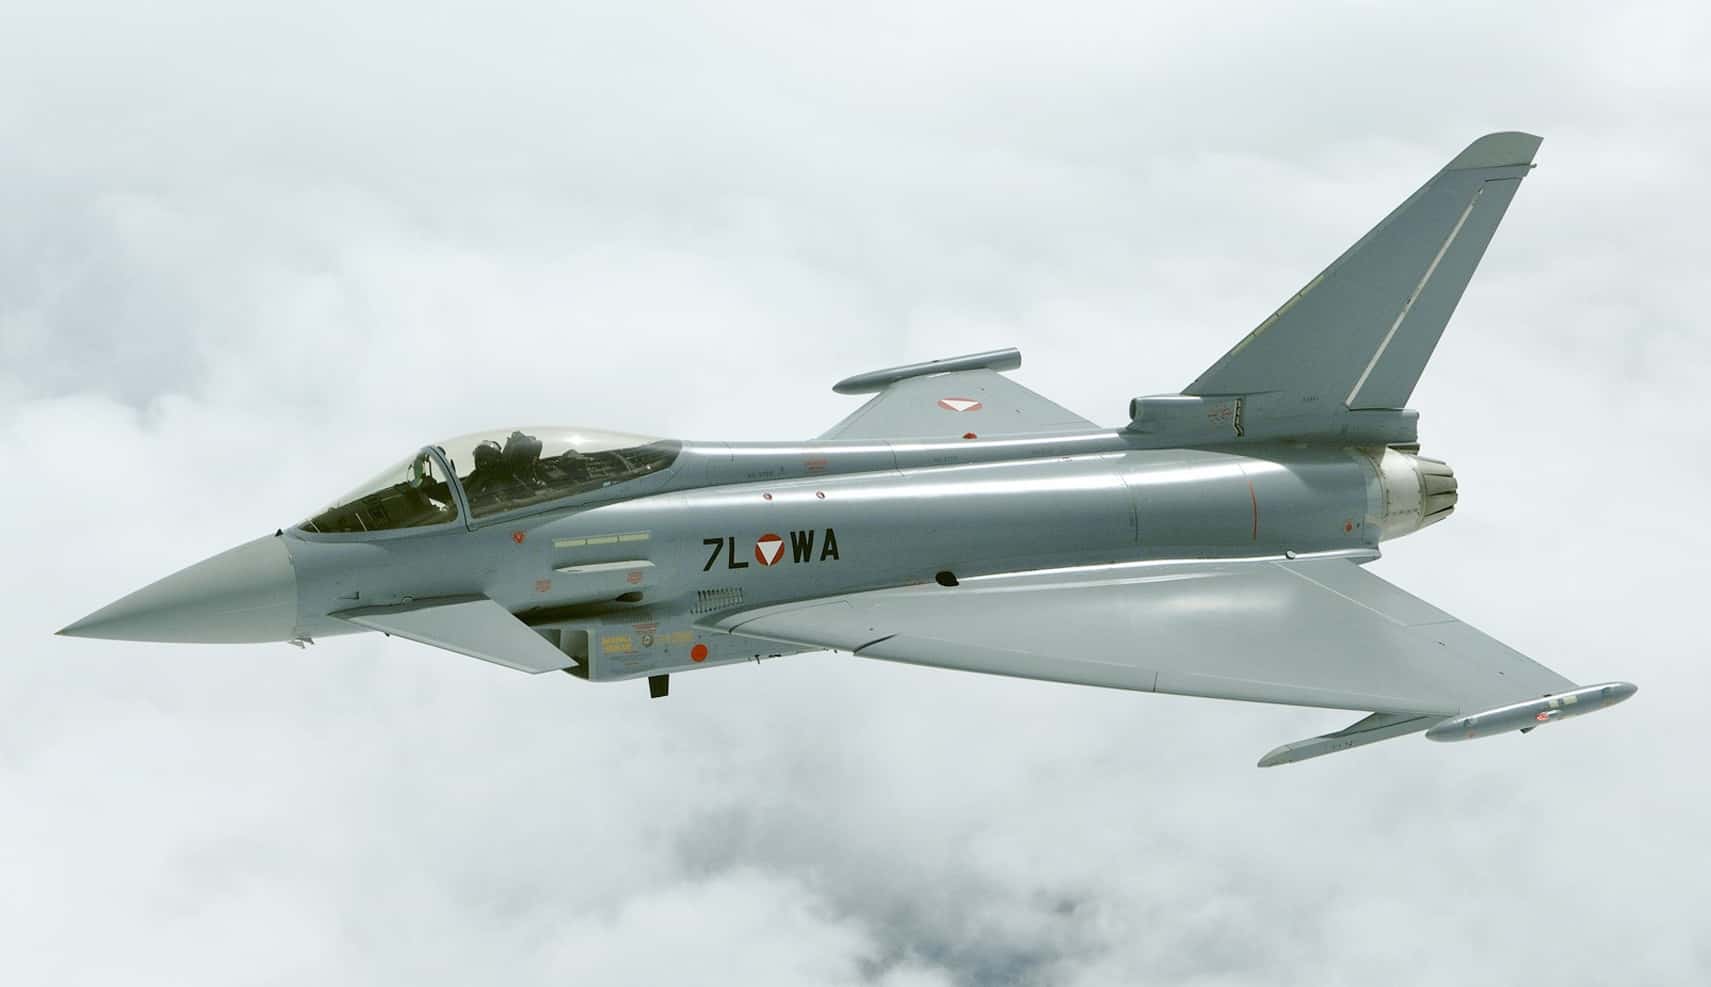 Aircraft like the Eurofighter Typhoon should be considered as robots, as they cannot fly safely without computer intervention, argues Prof Darwin Caldwell (Credit: Bundesheer/Zinner)